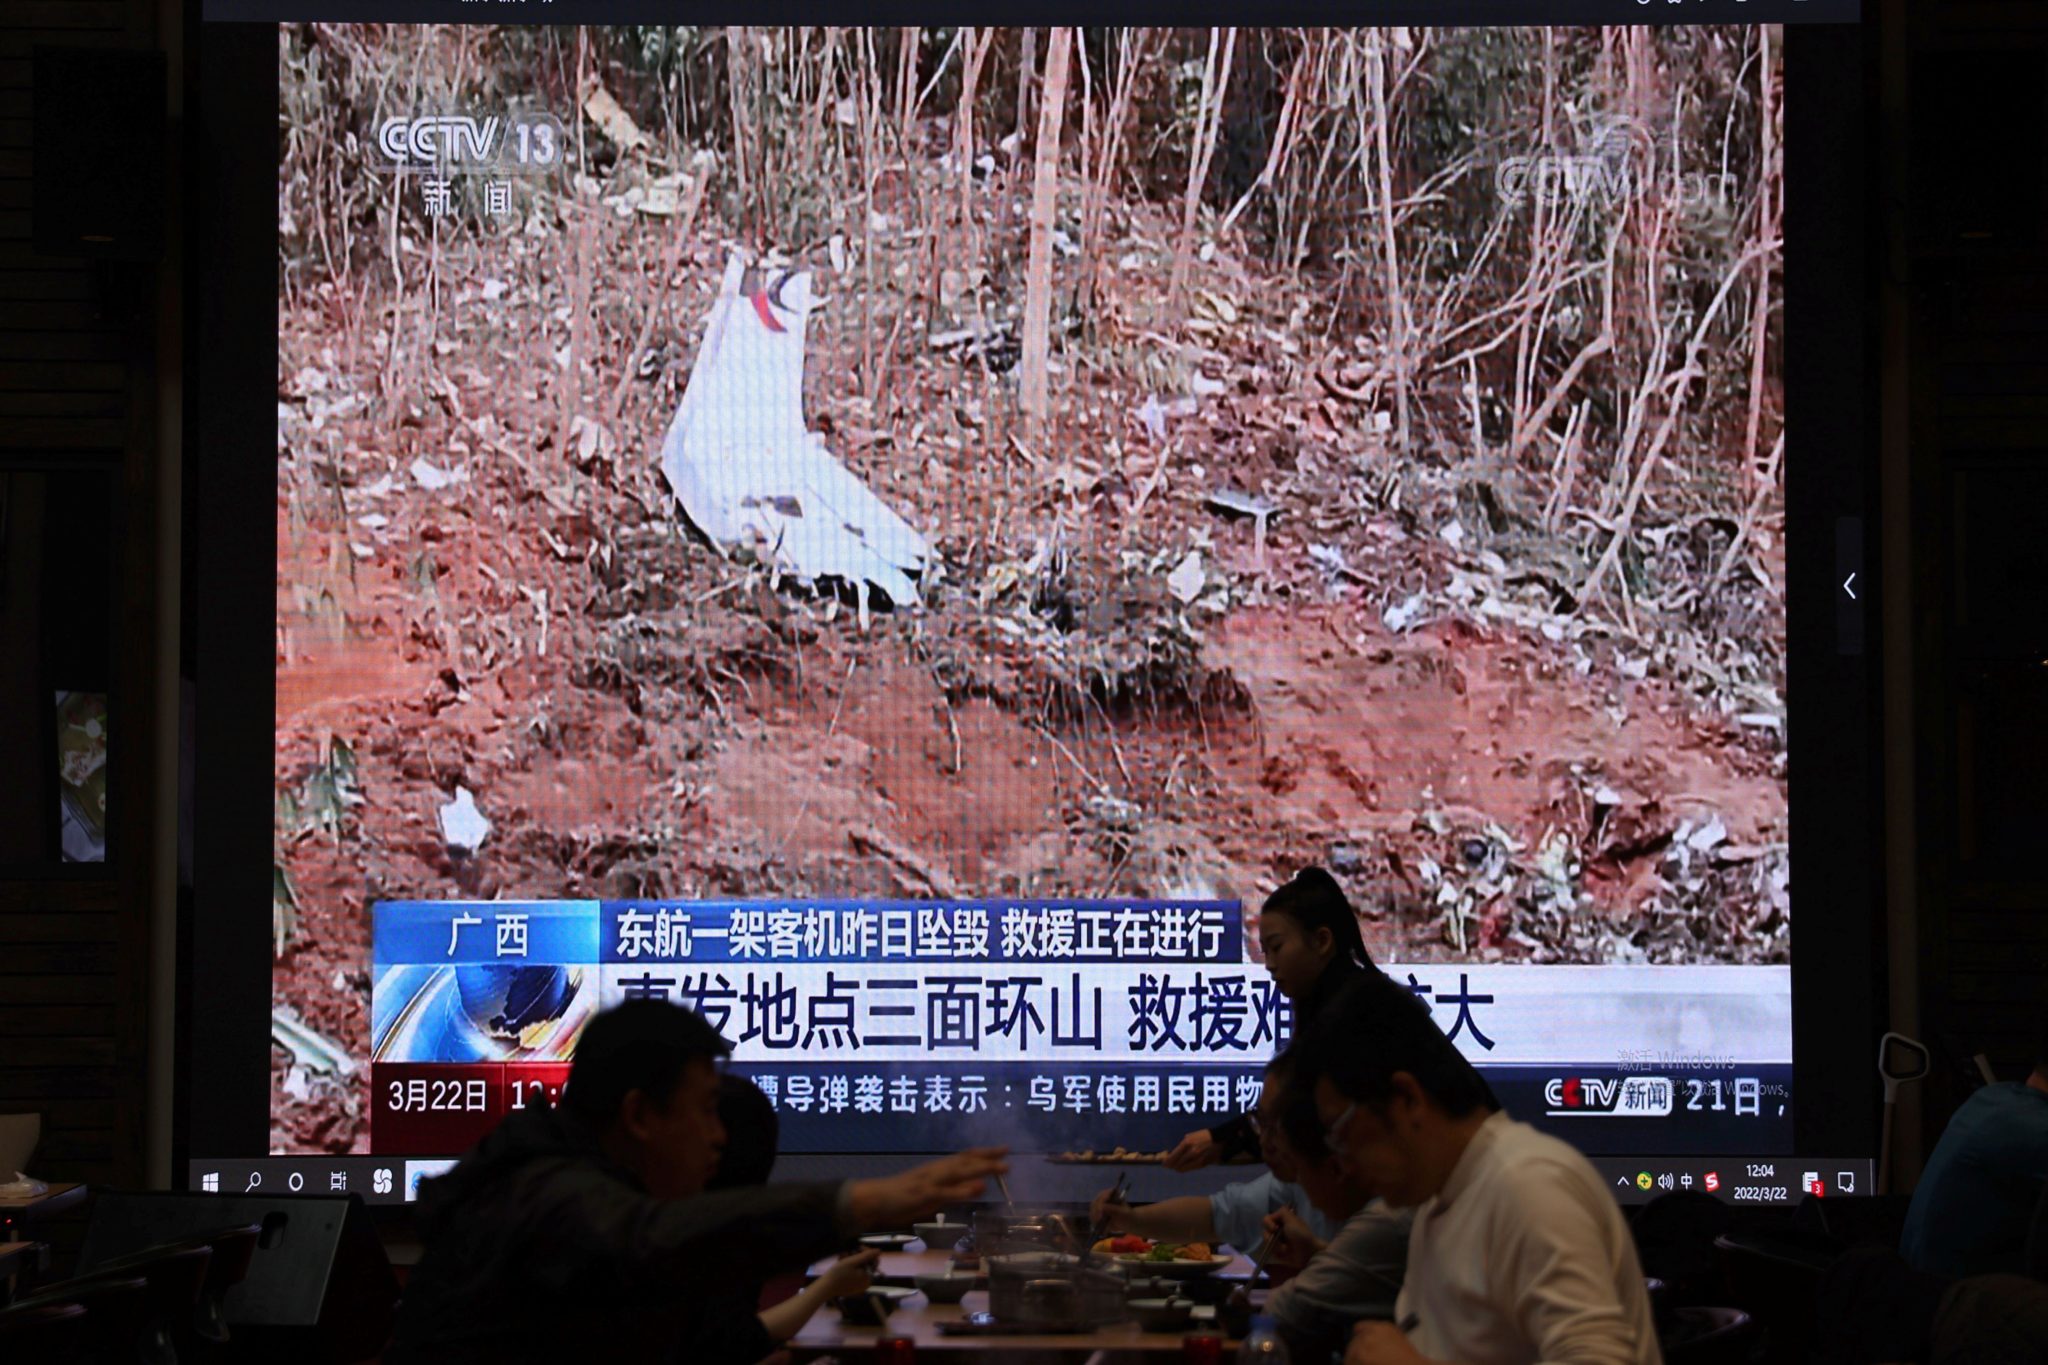 A screen shows news footage of plane debris at the crash site. Image: Cynthia Lee / Alamy Stock Photo